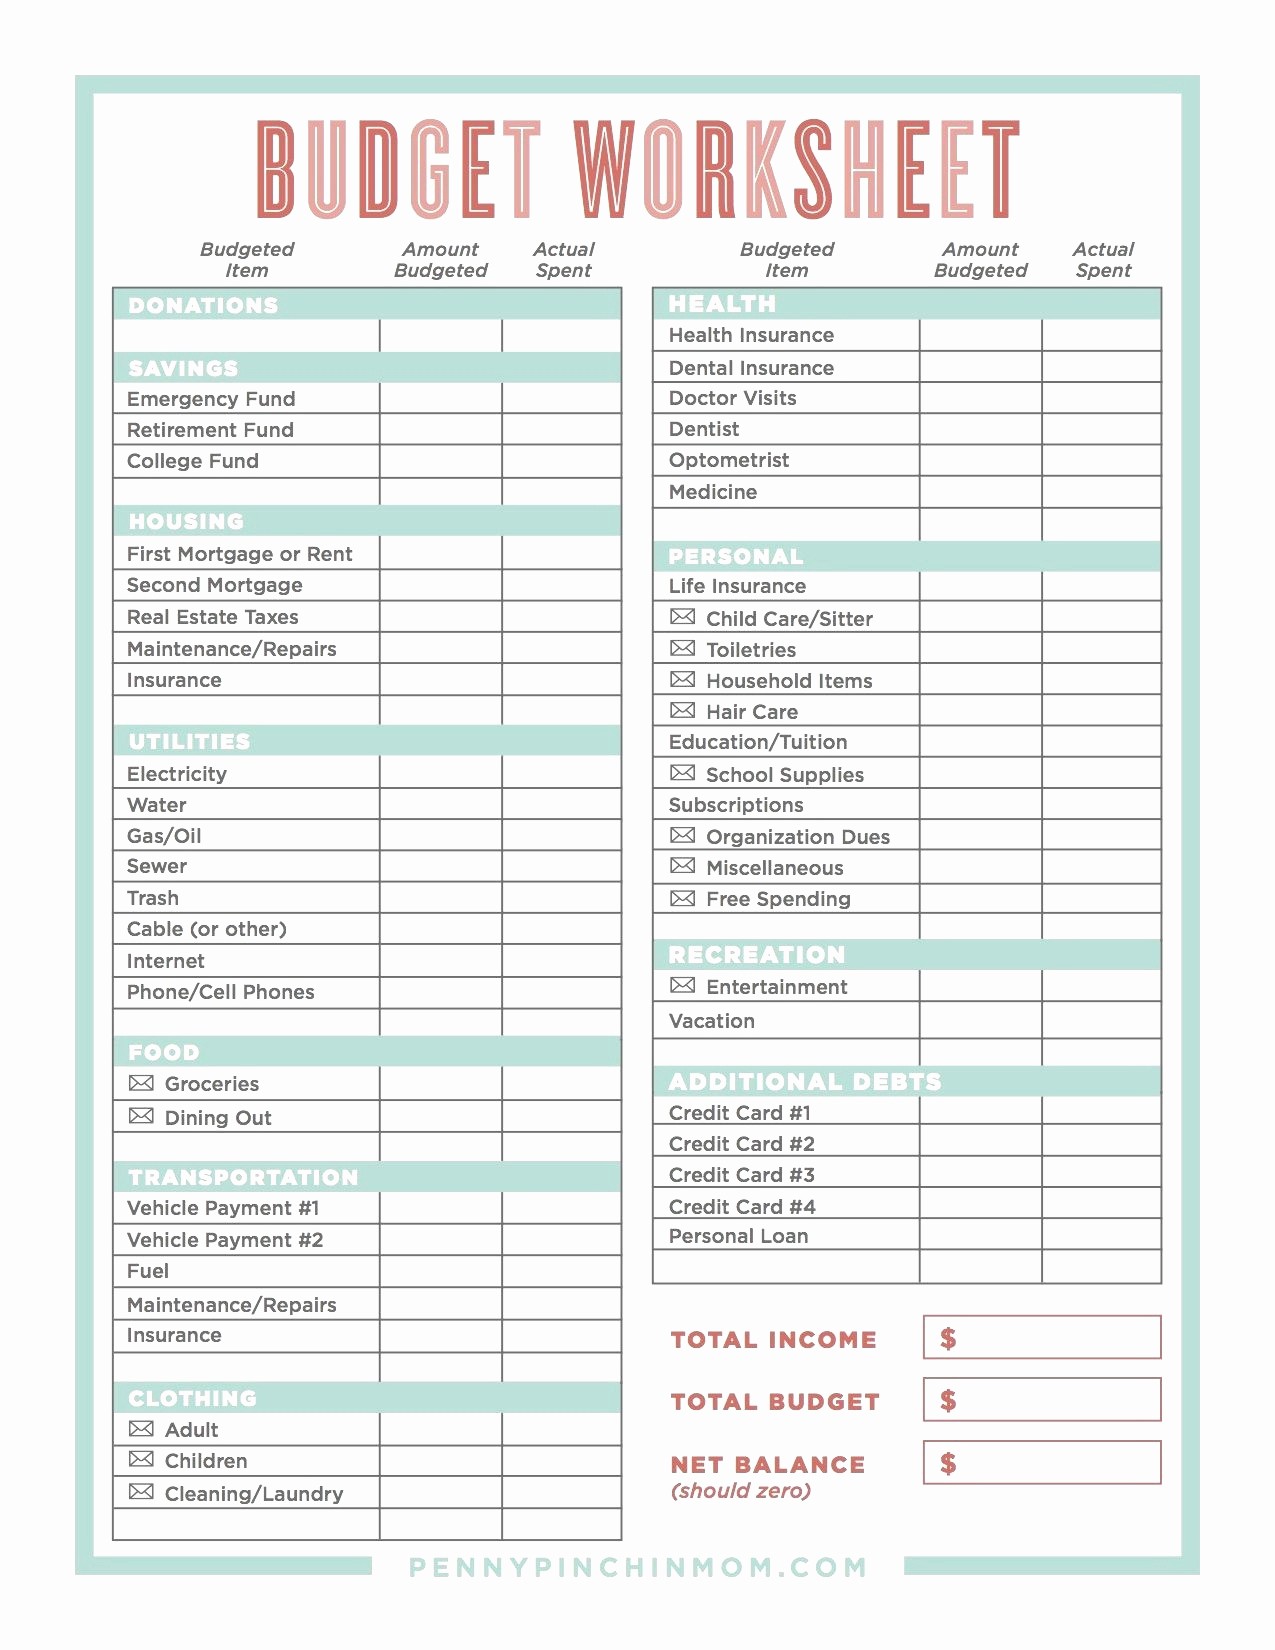 Dave Ramsey Budget Worksheet Best Of 50 New Bud Document Budgeting